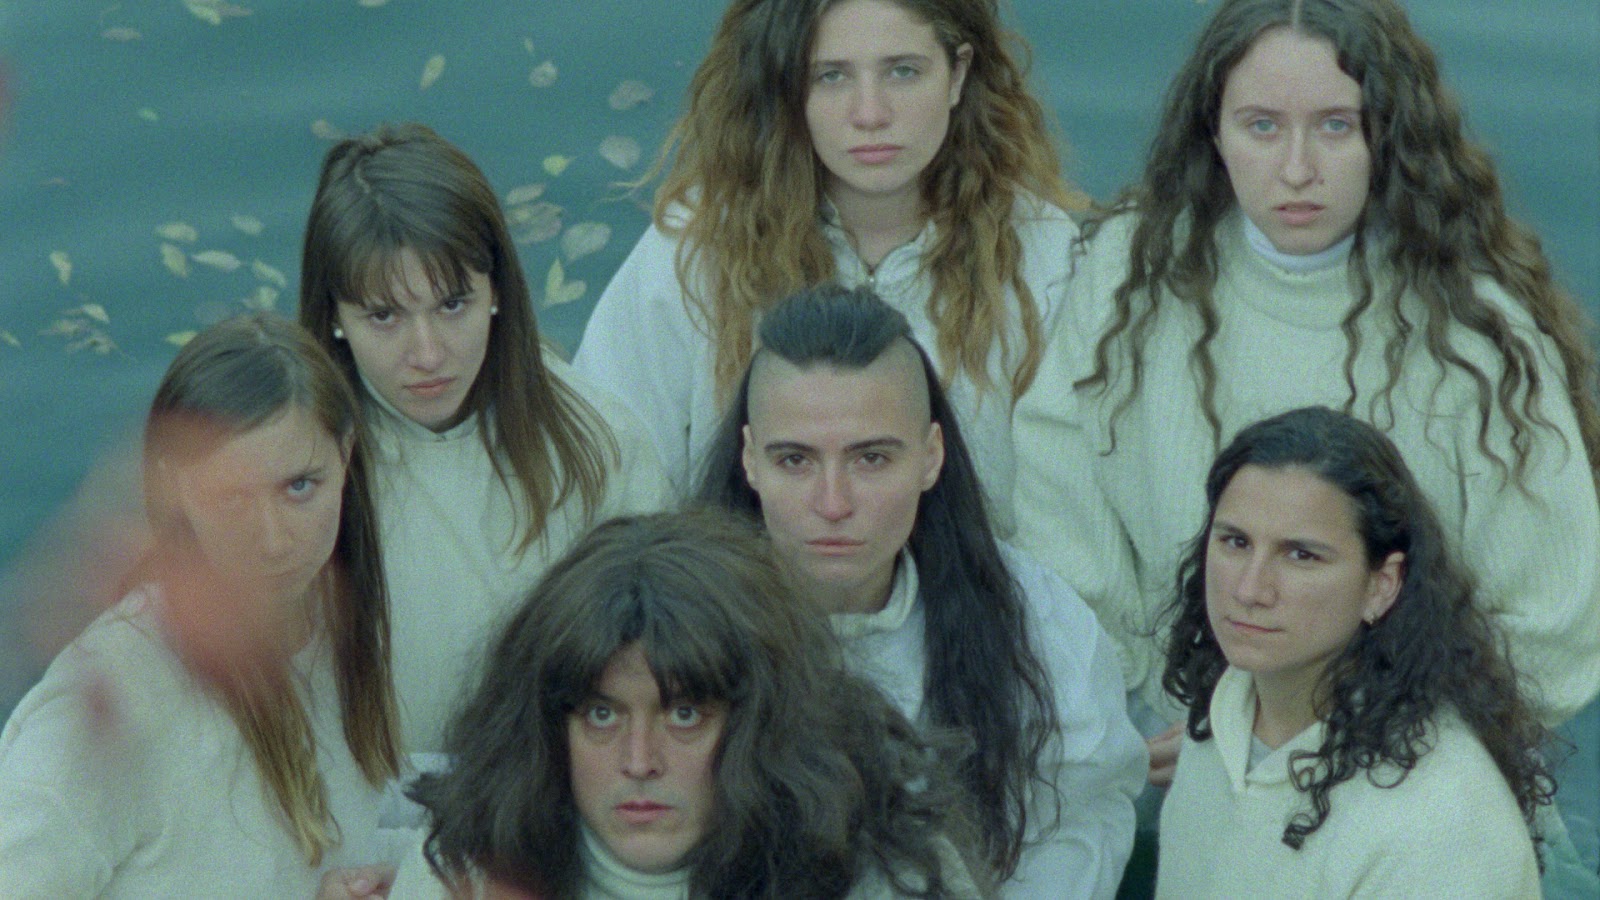 From the film Mammalia, a group of long-haired people, wearing all white, look up at the camera above.